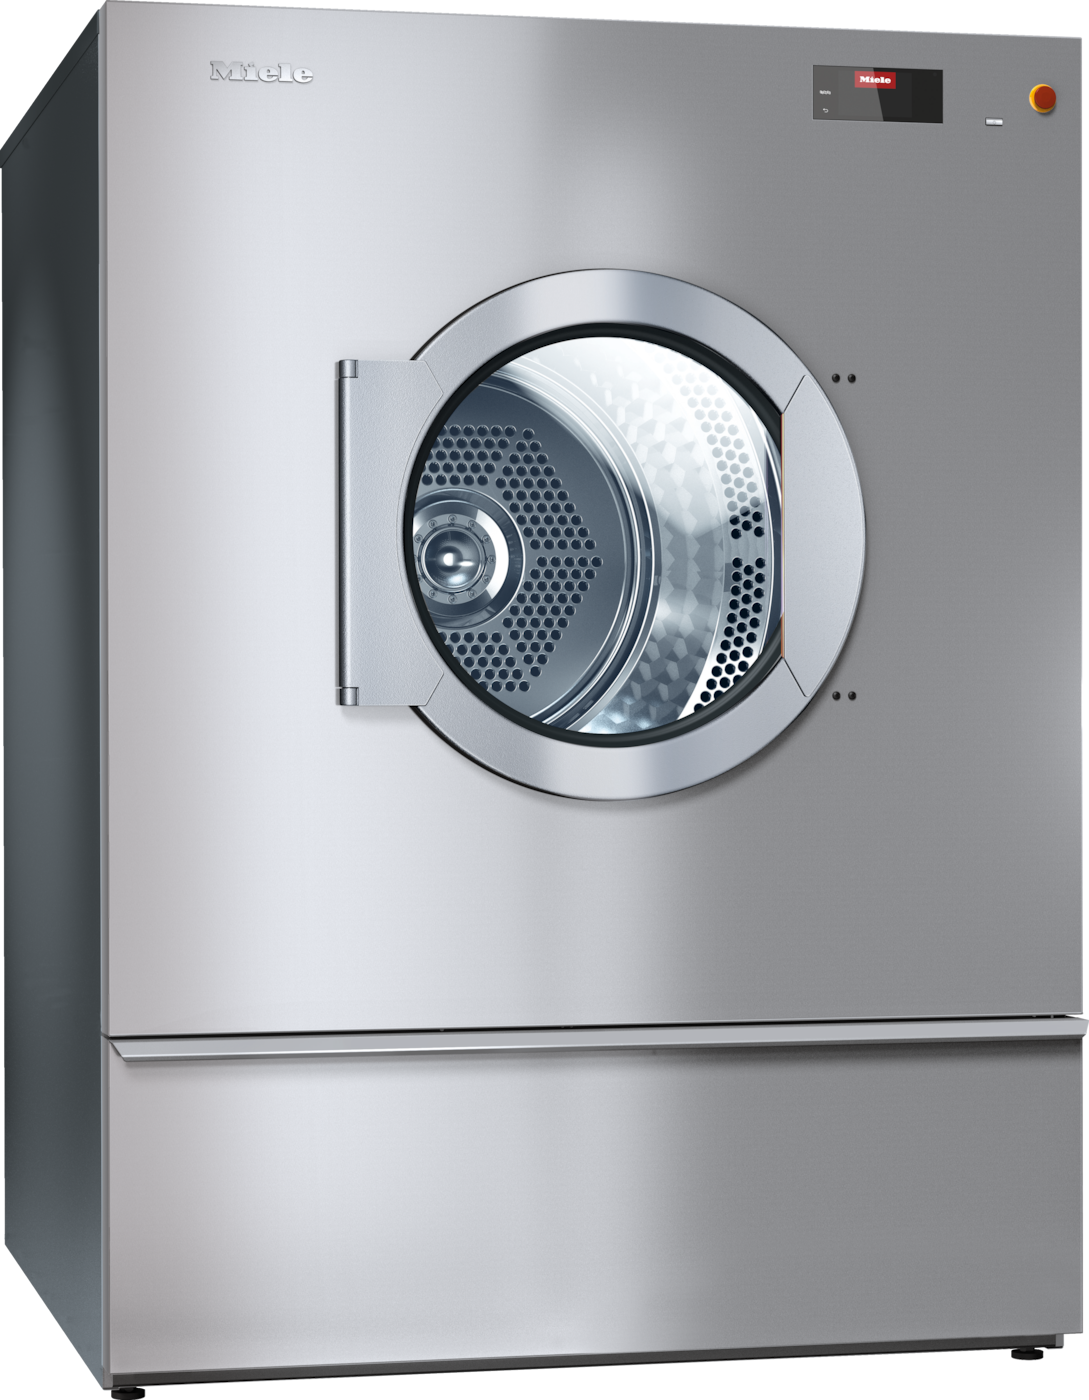 PDR 944 [EL SOM] - Vented dryer, electrically heated 